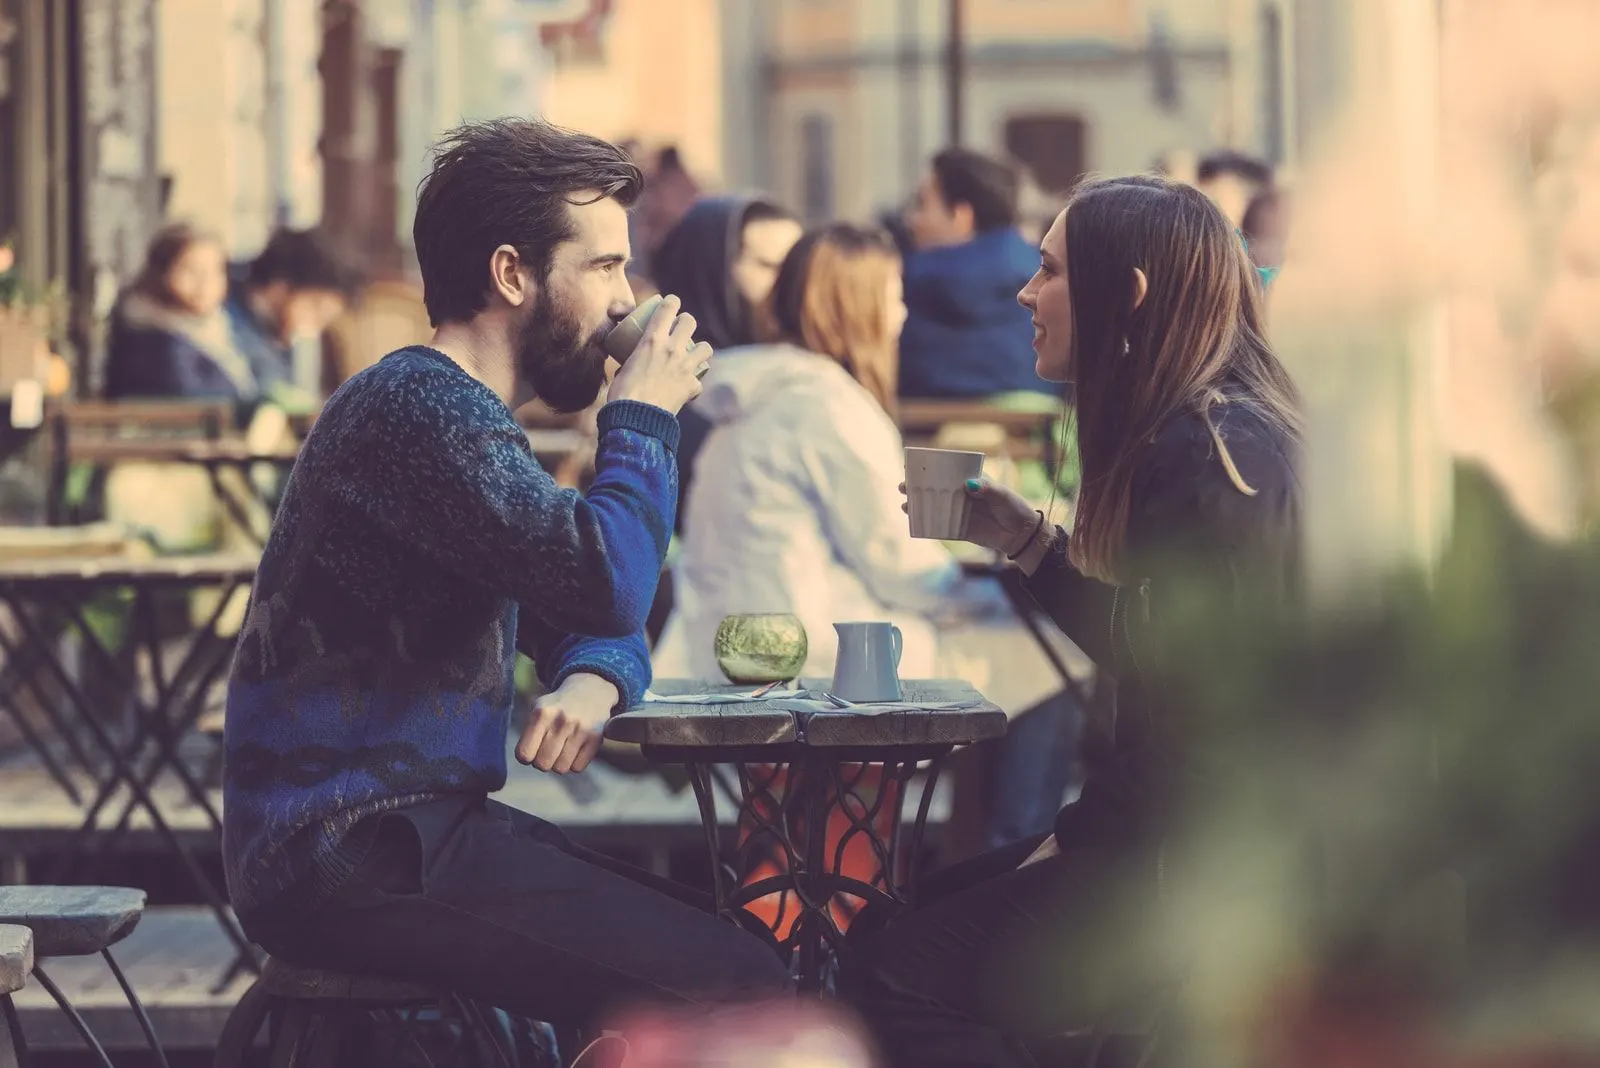 couple drinking coffee in cafe